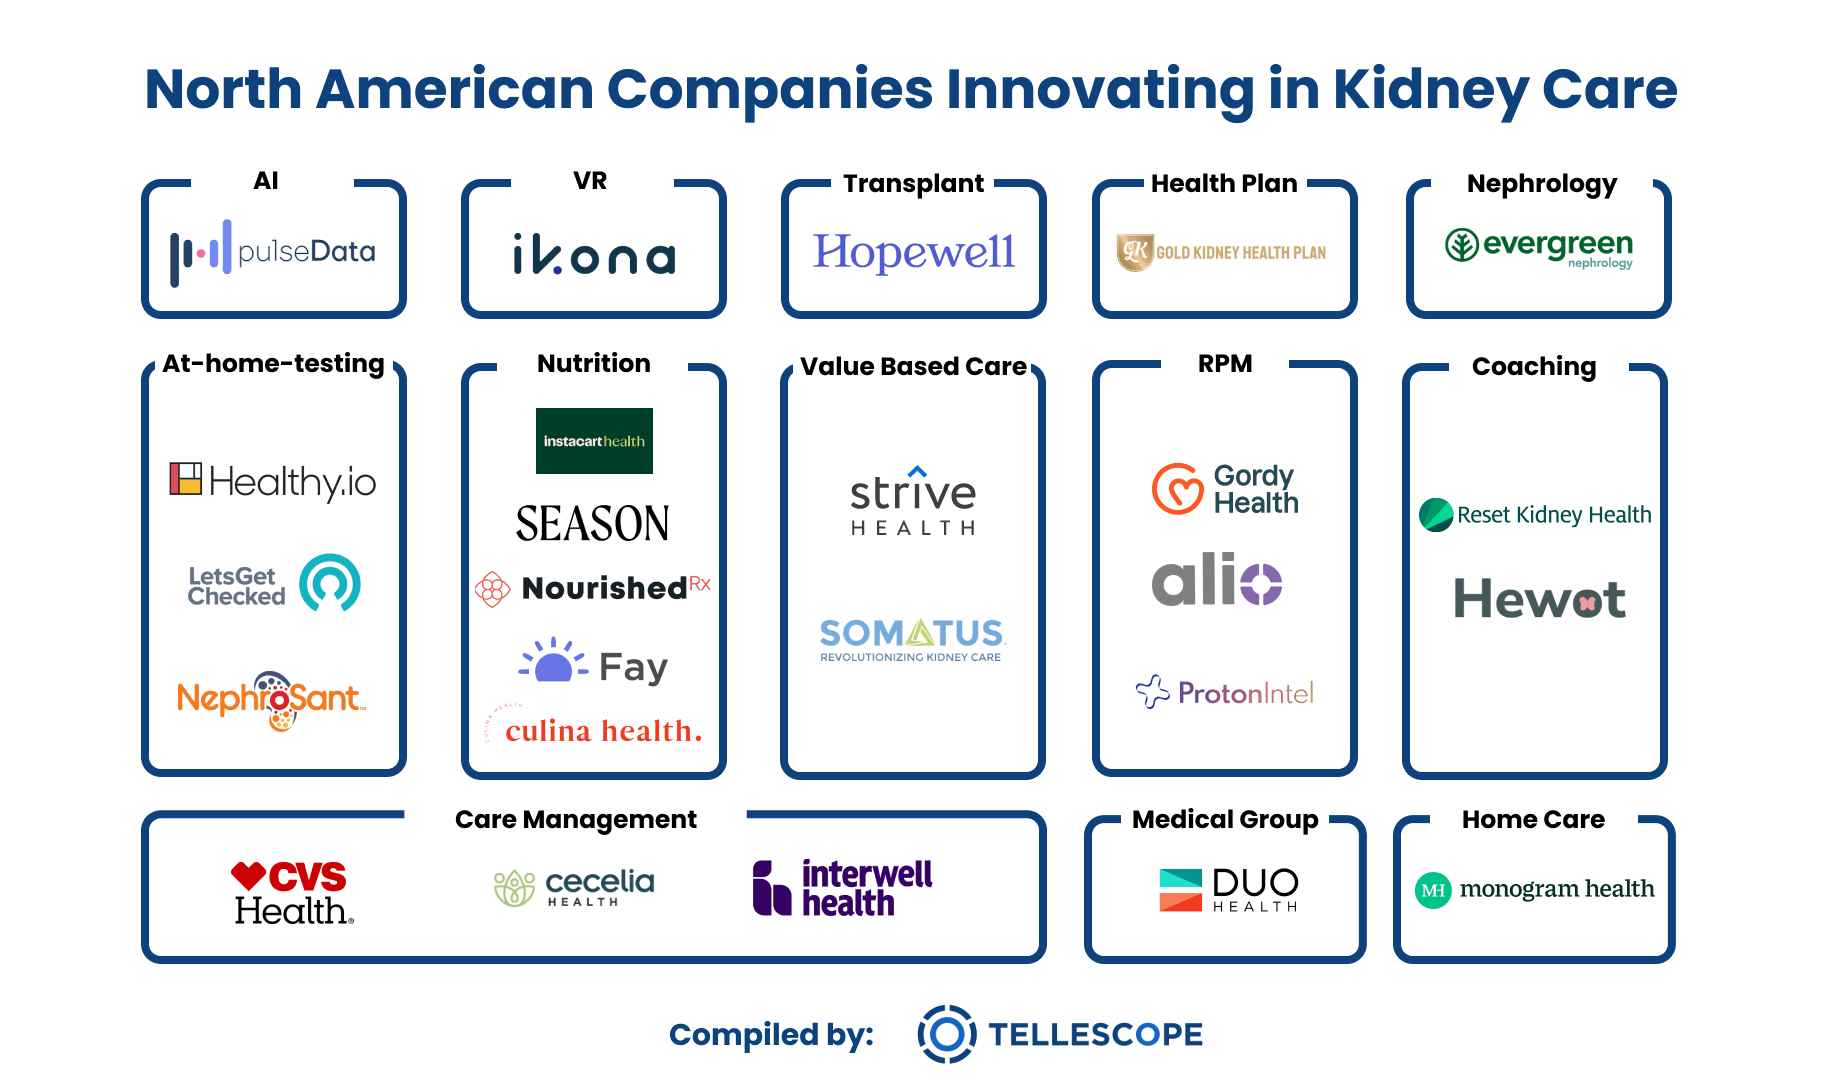 North American Companies Innovating in Kidney Care image